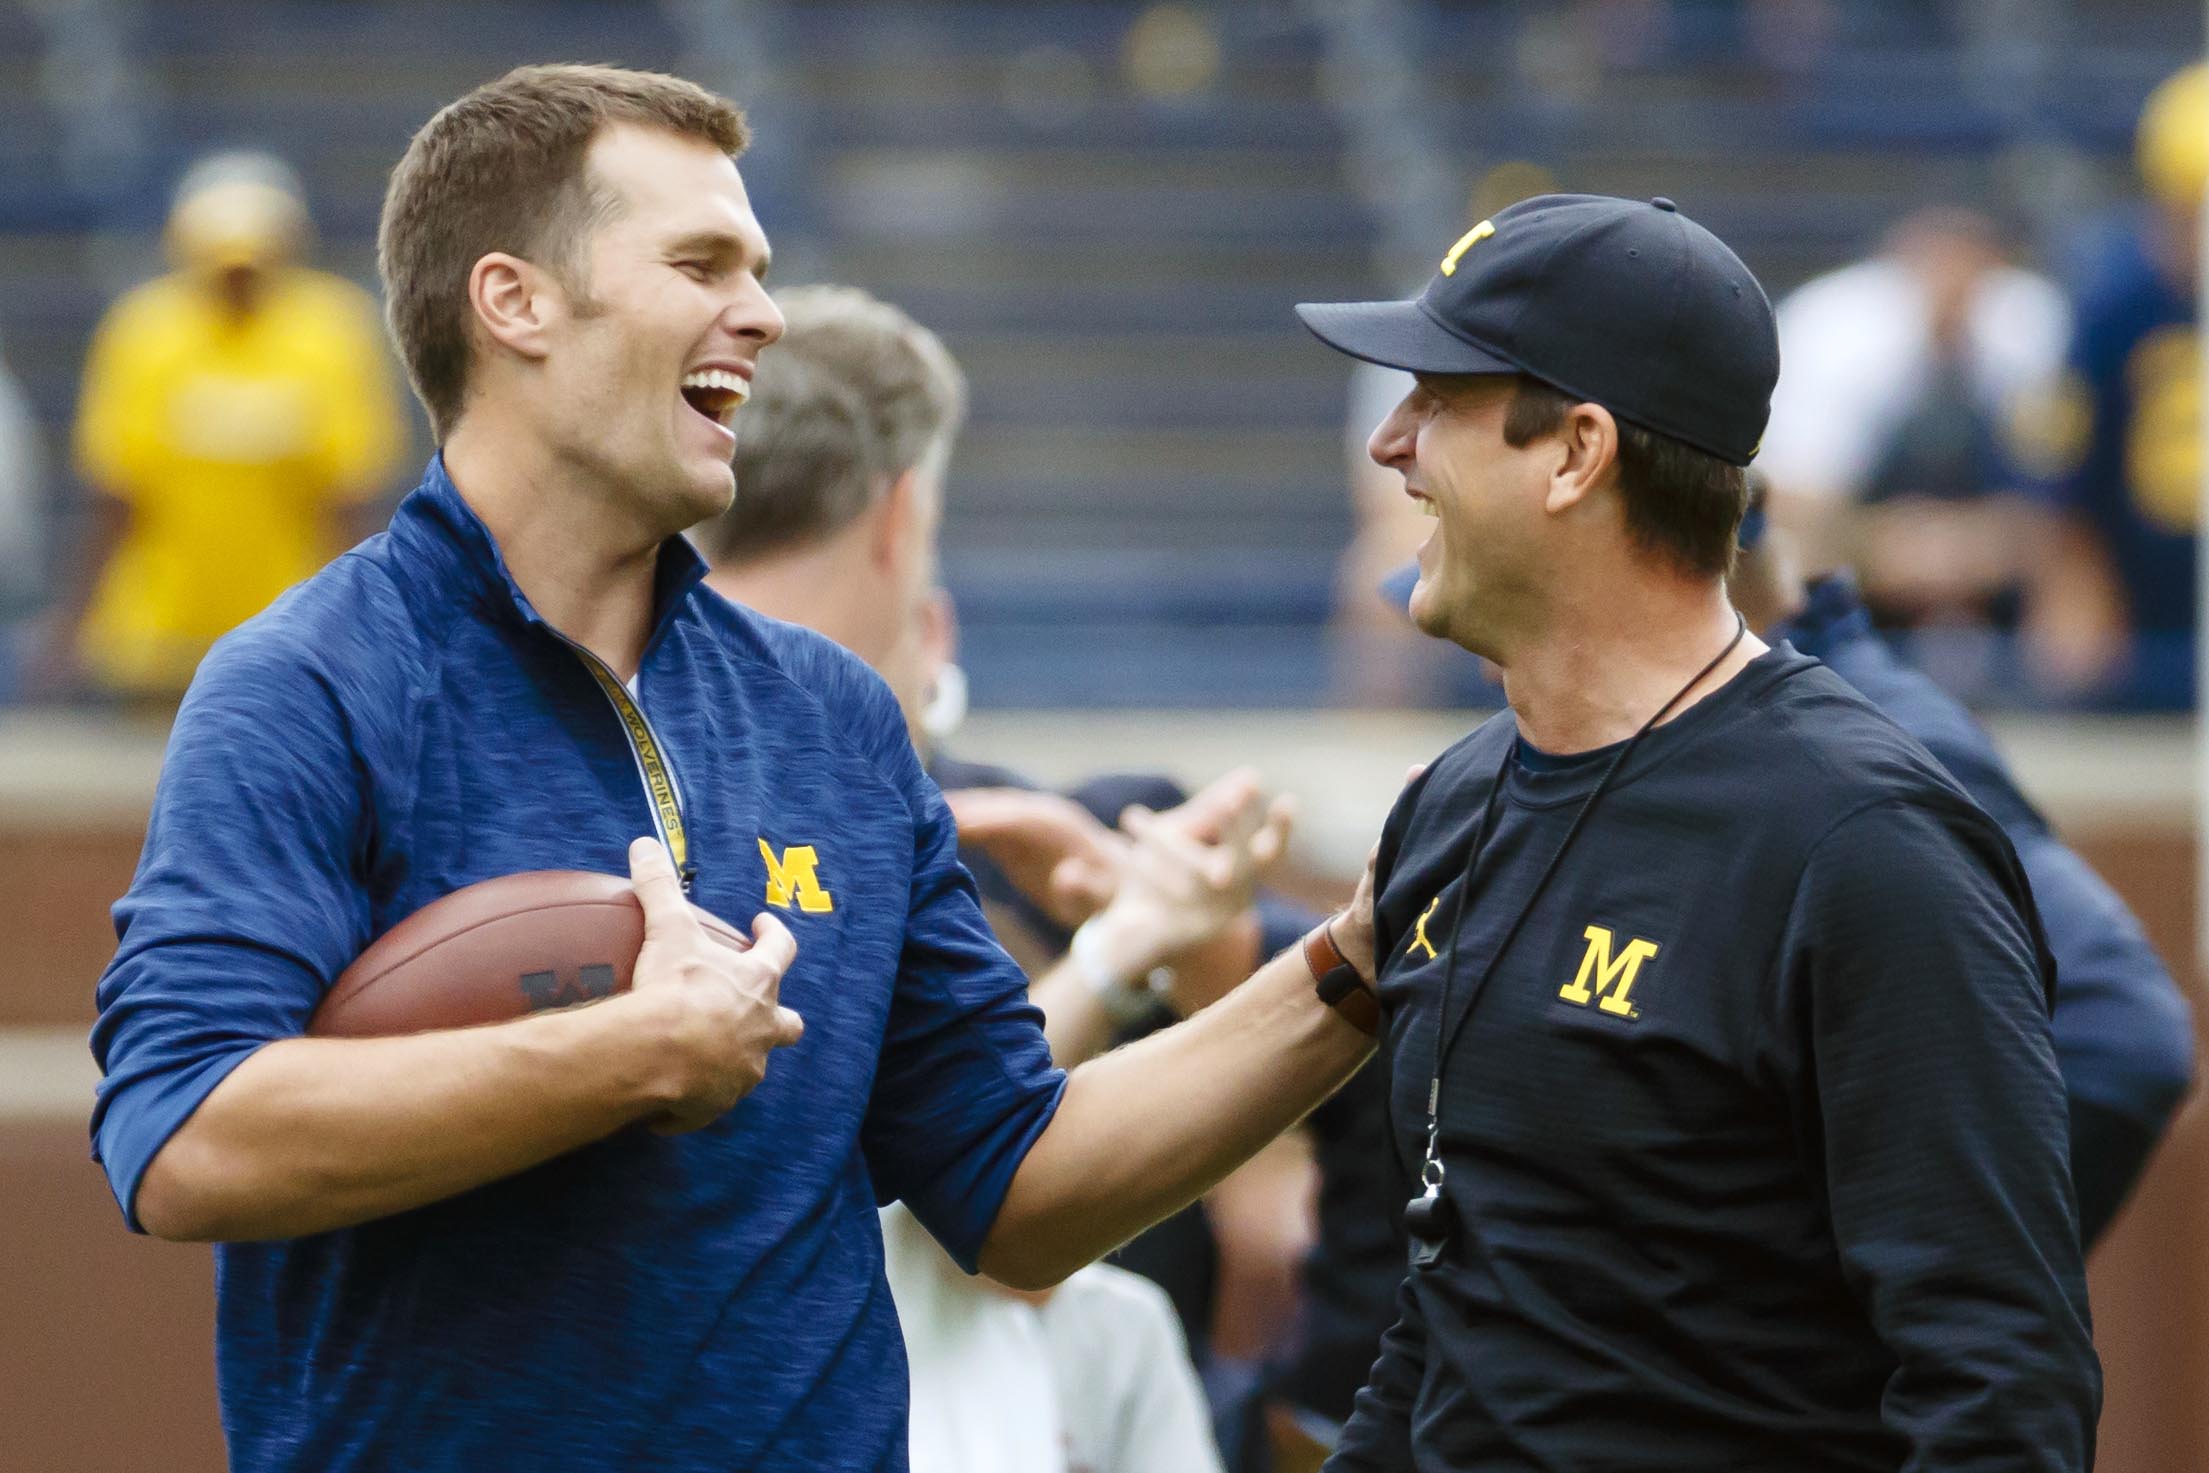 tom brady narrated a hype video for the game ahead of michigan-ohio state